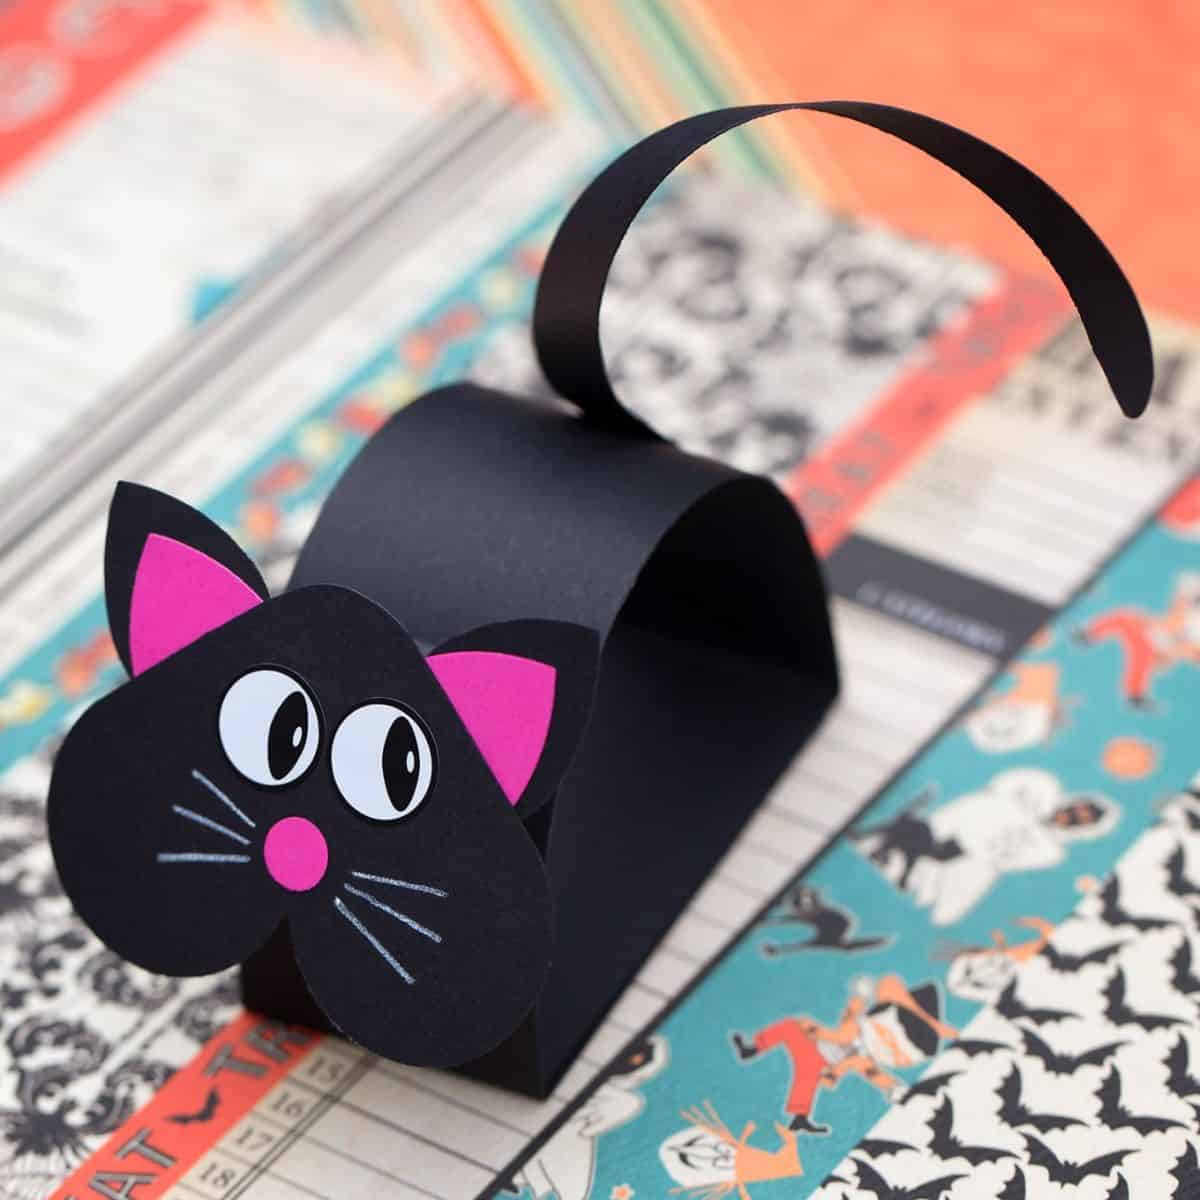 Cat Craft For Kids
 15 SPOOKTACULAR HALLOWEEN ART PROJECTS FOR KIDS